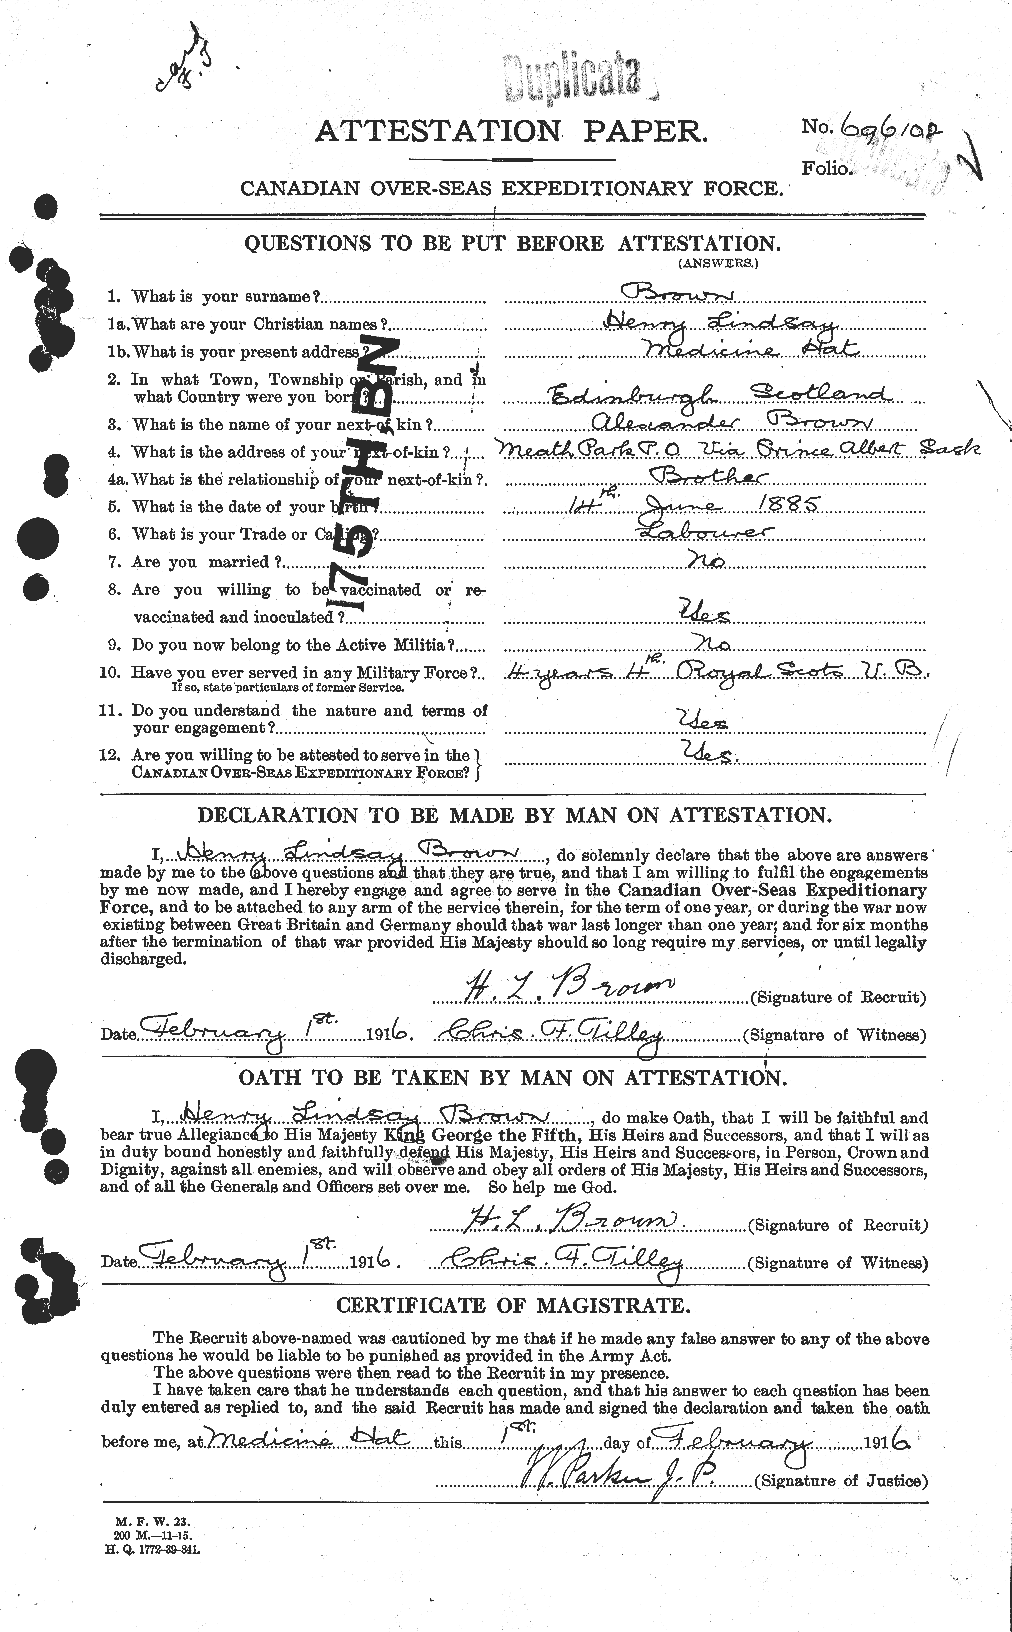 Personnel Records of the First World War - CEF 265533a